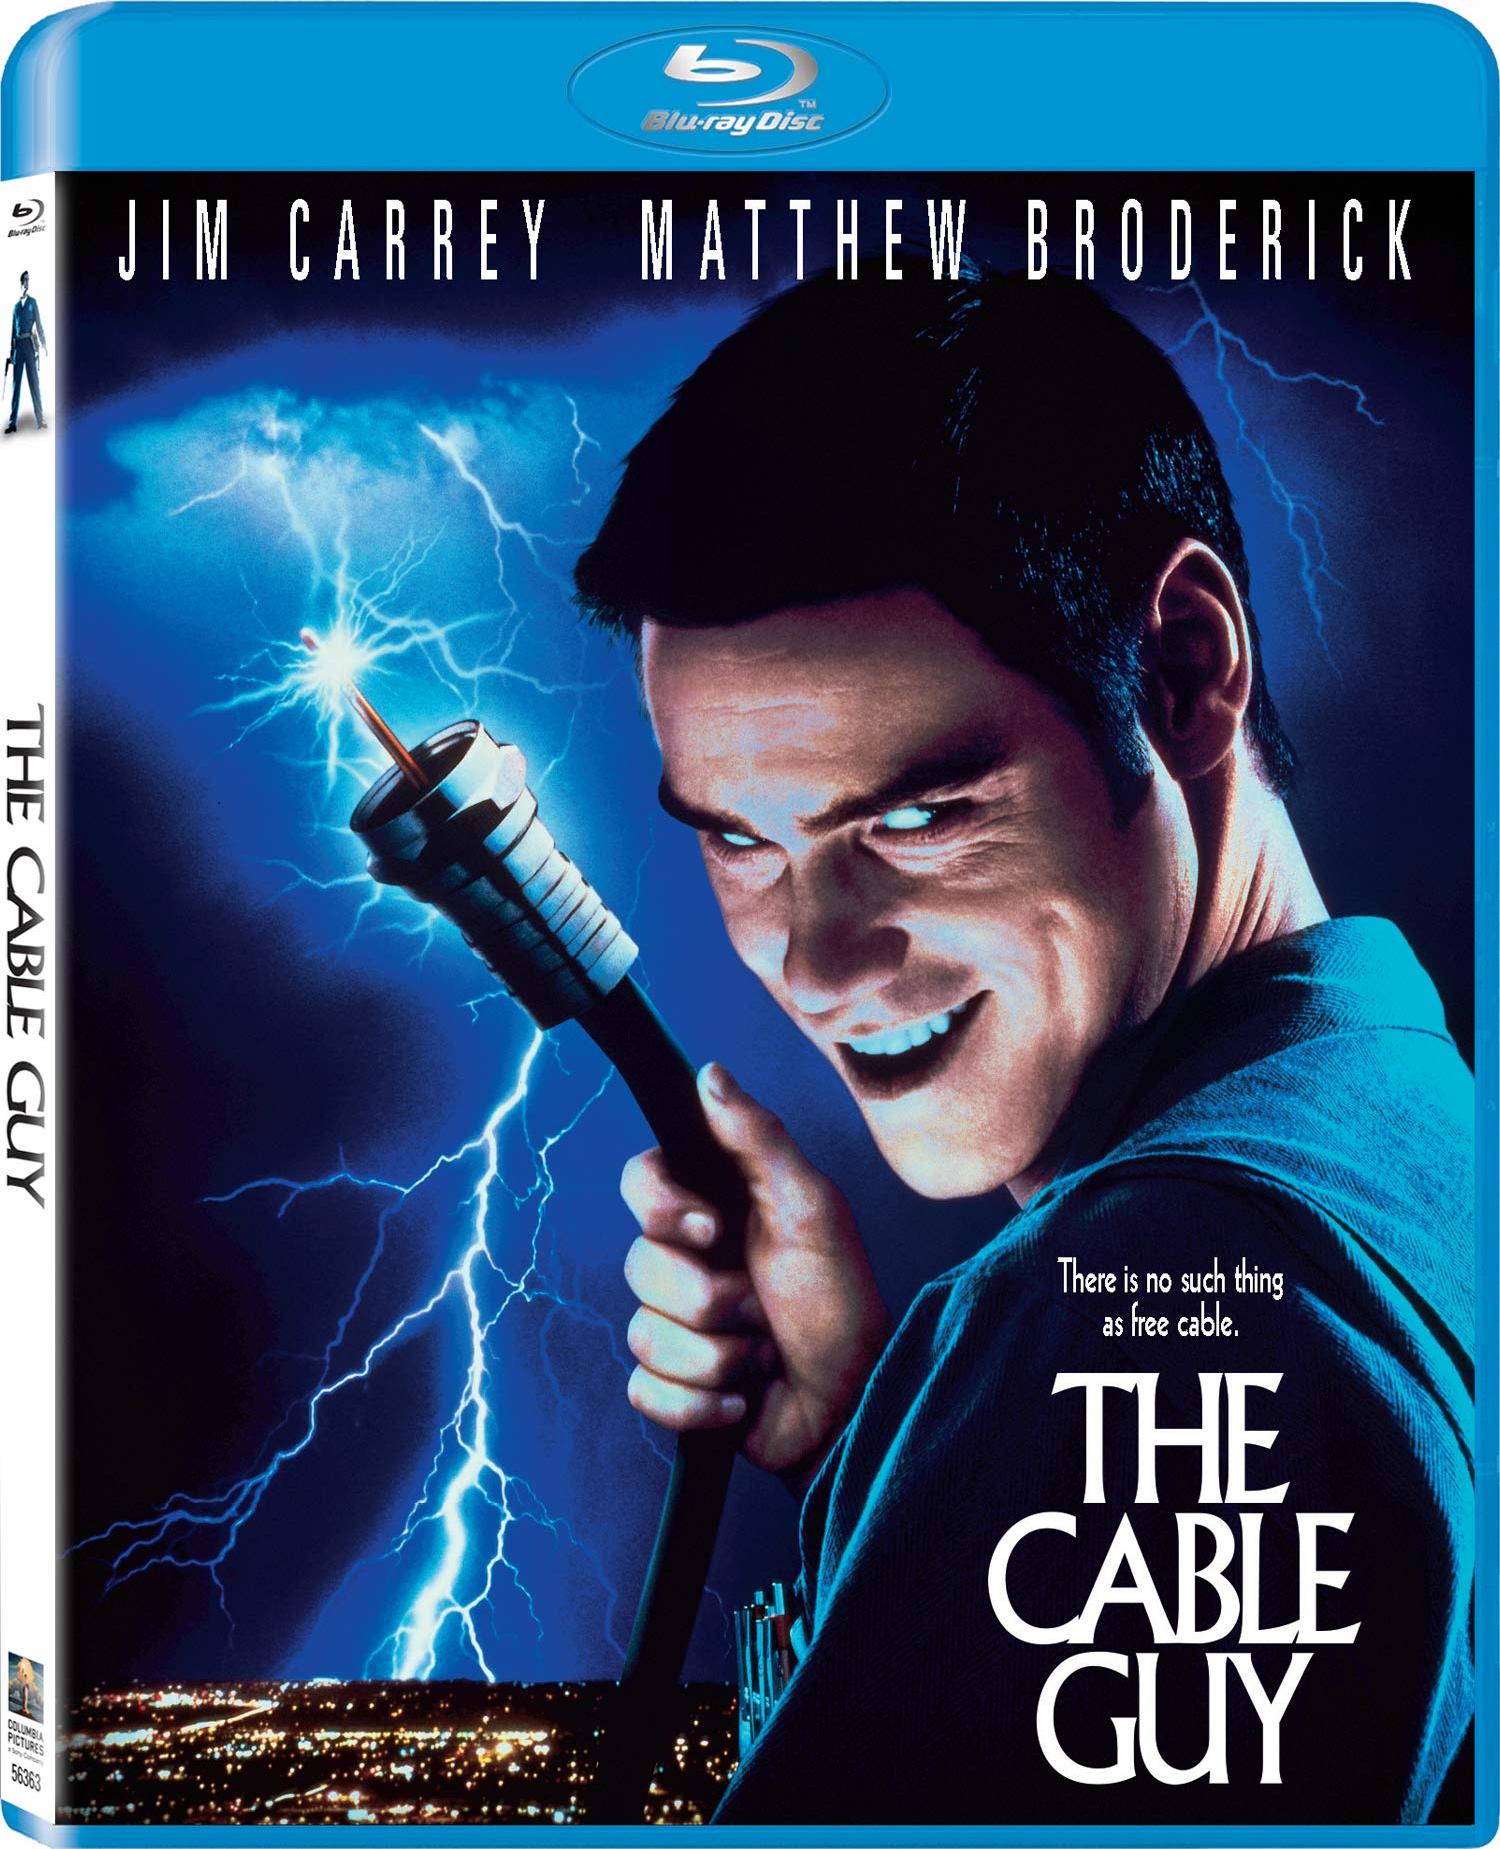 The Cable Guy/Home media, Moviepedia